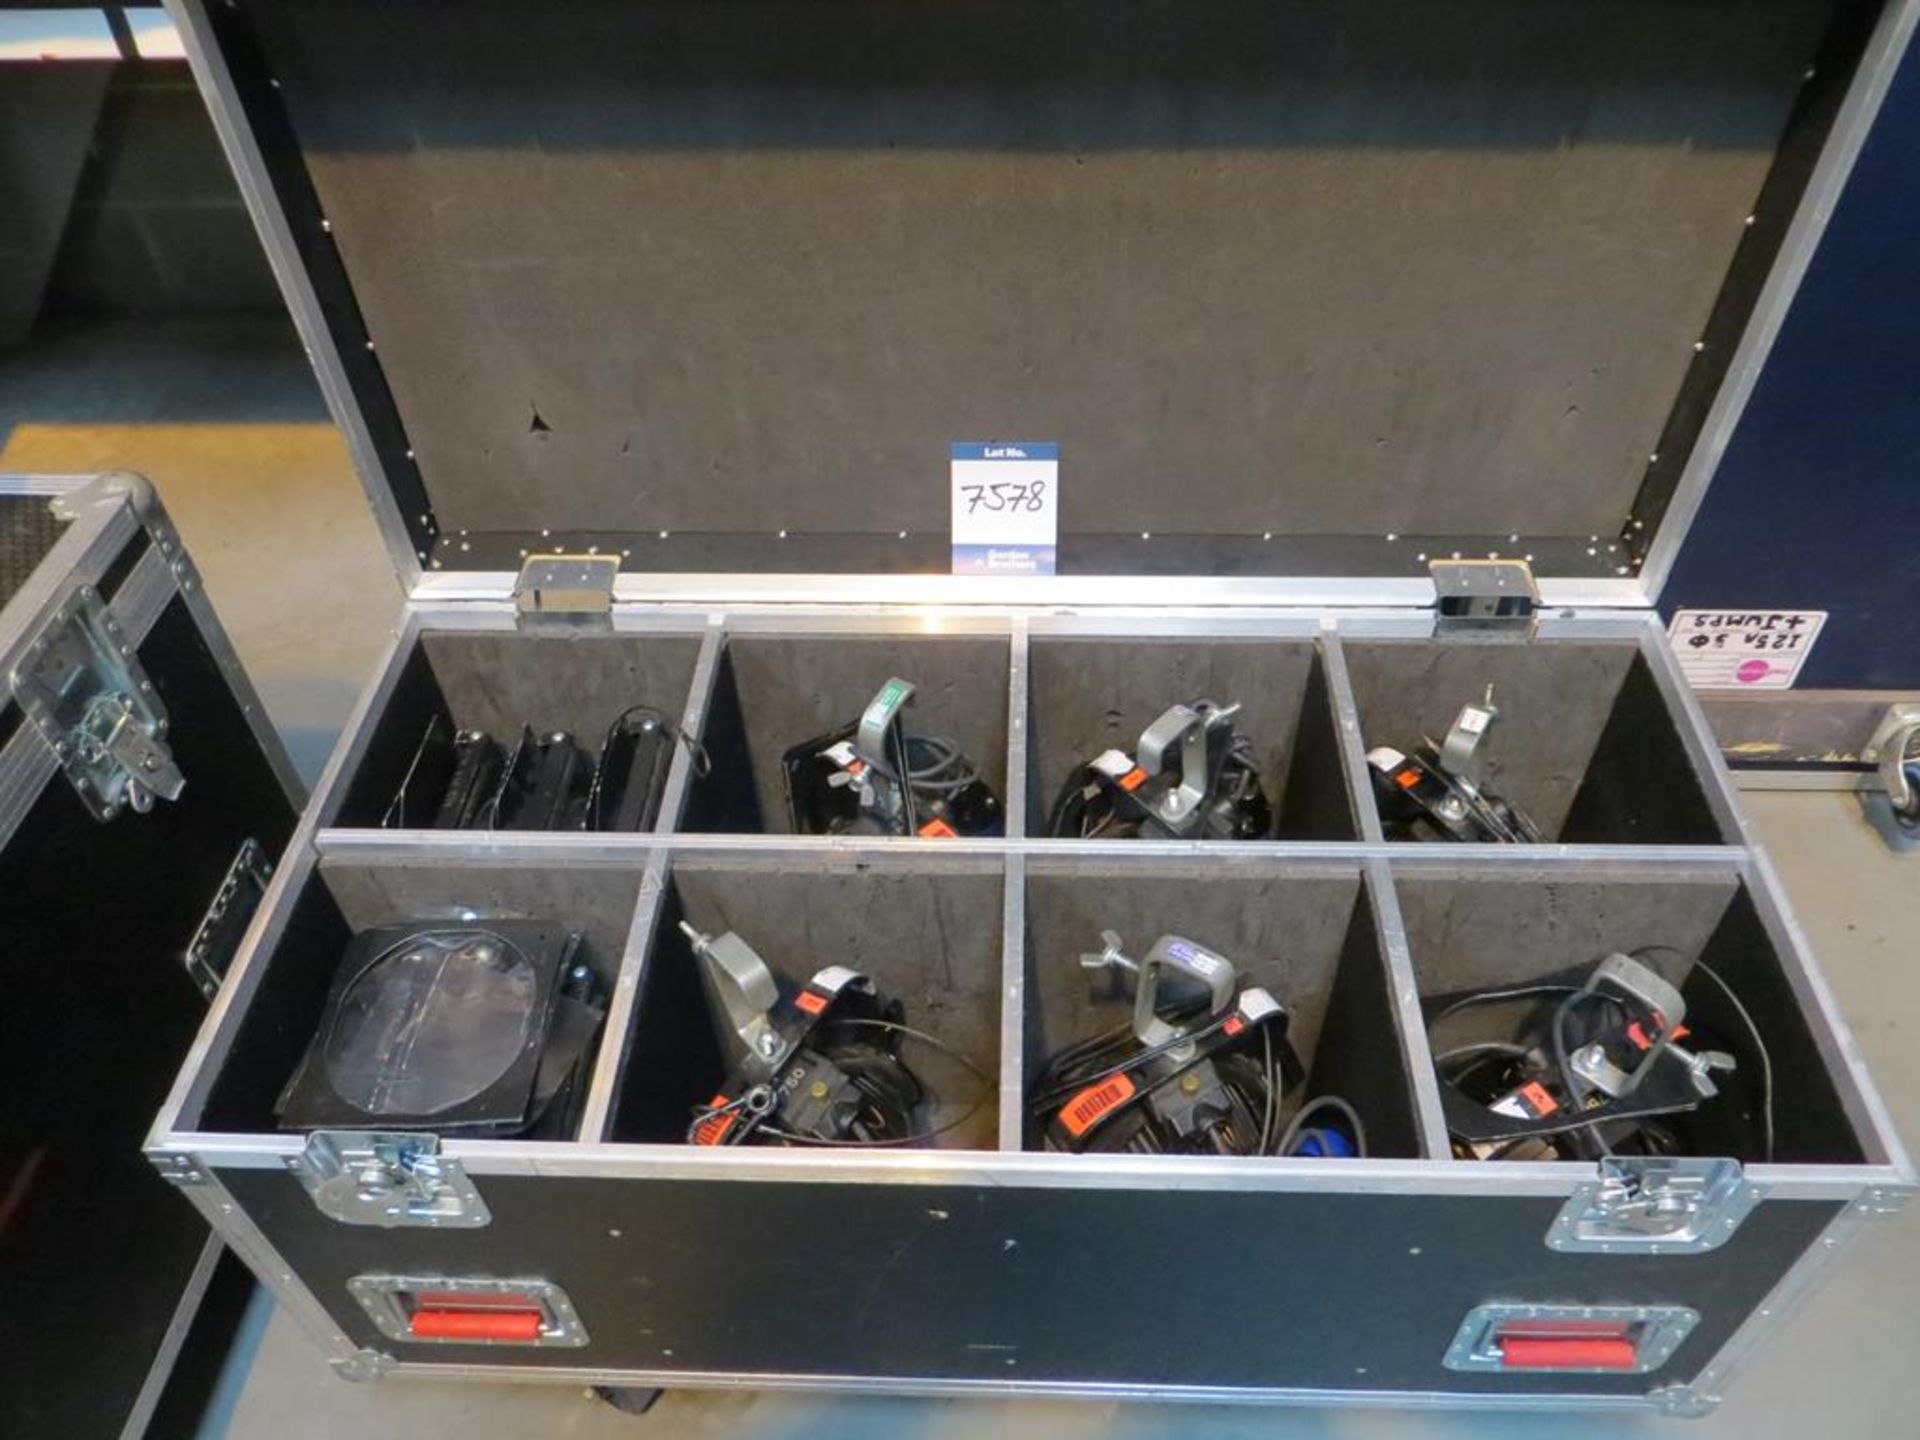 6x No. ETC, Source 4 Parnel spotlamps with hangers in transit case: Unit C Moorside, 40 Dava Street, - Image 2 of 4